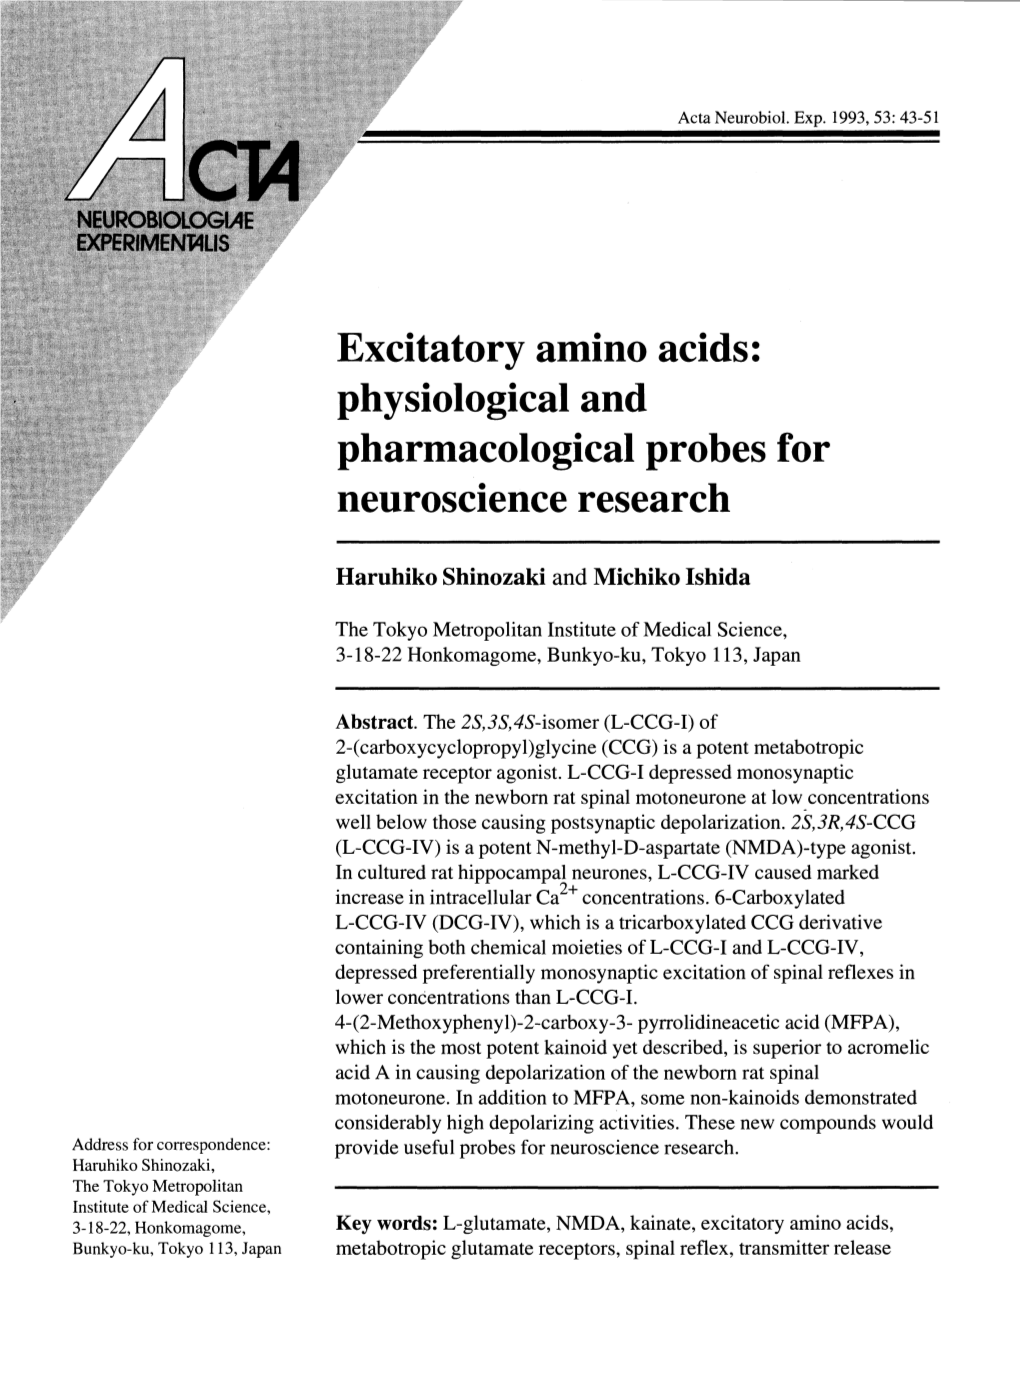 Excitatory Amino Acids: Physiological and Pharmacological Probes for Neuroscience Research